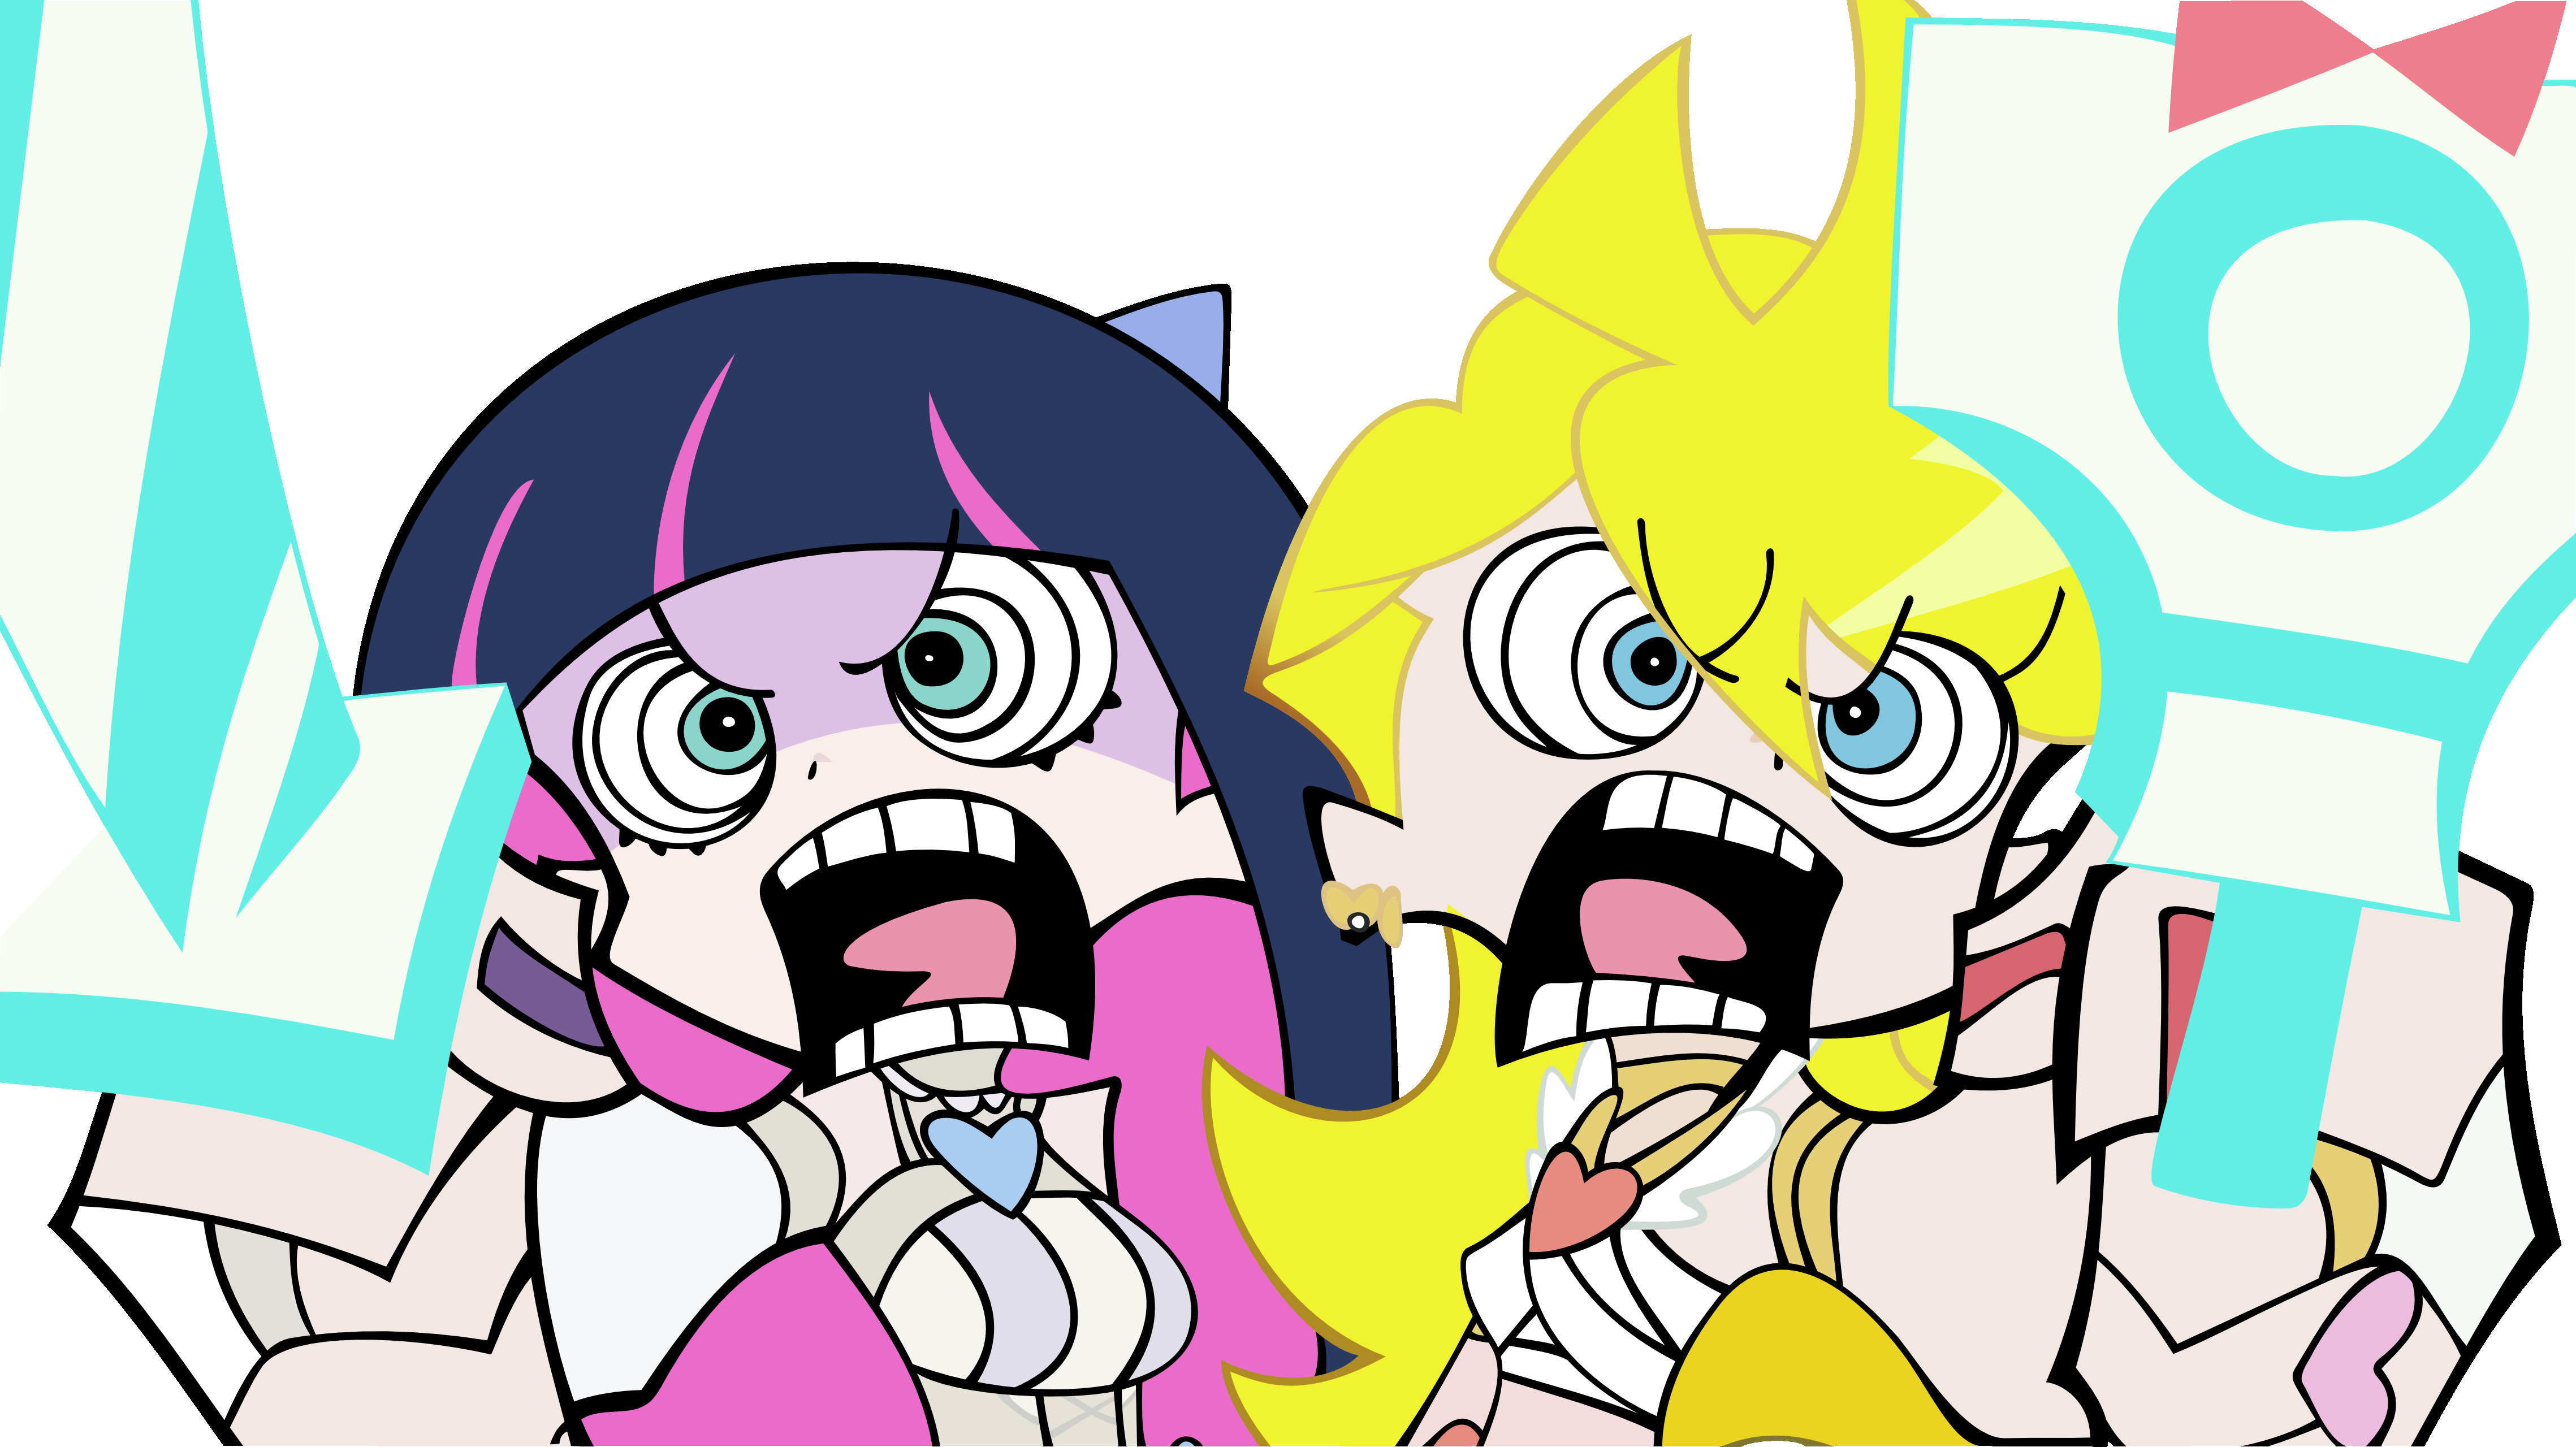 Panty And Stocking With Garterbelt, Angel, Anime, Anime Girls, Anarchy Panty, Anarchy Stocking Wallpaper